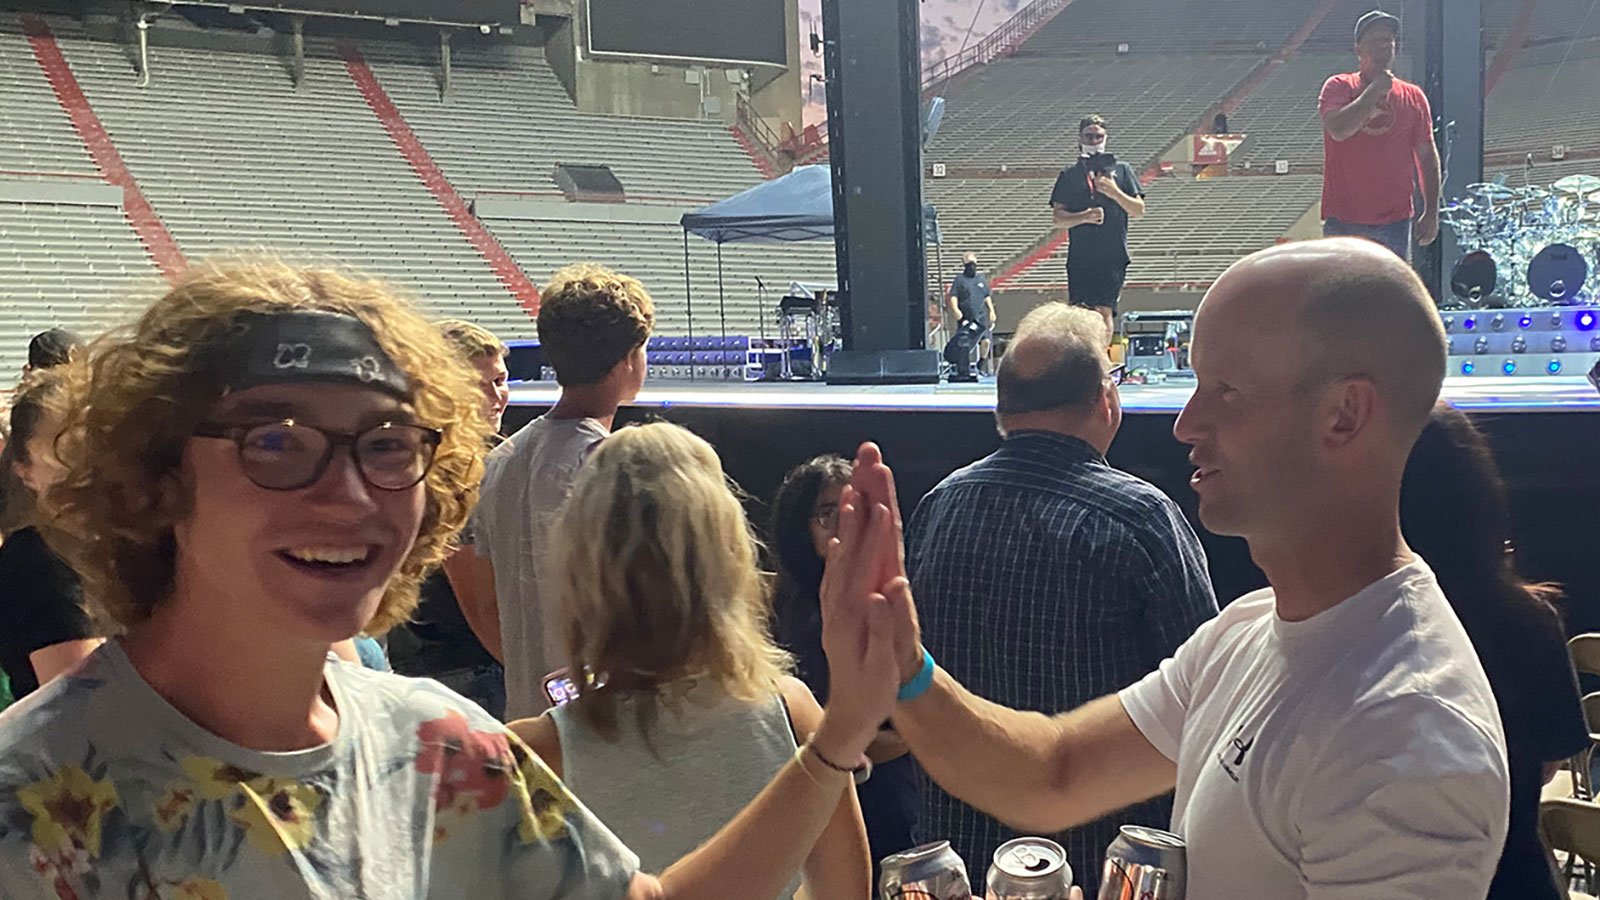 Senior mechanical and materials engineering student Carson Emeigh gets a high five during soundcheck as Garth Brooks talks to the crowd on stage behind him.